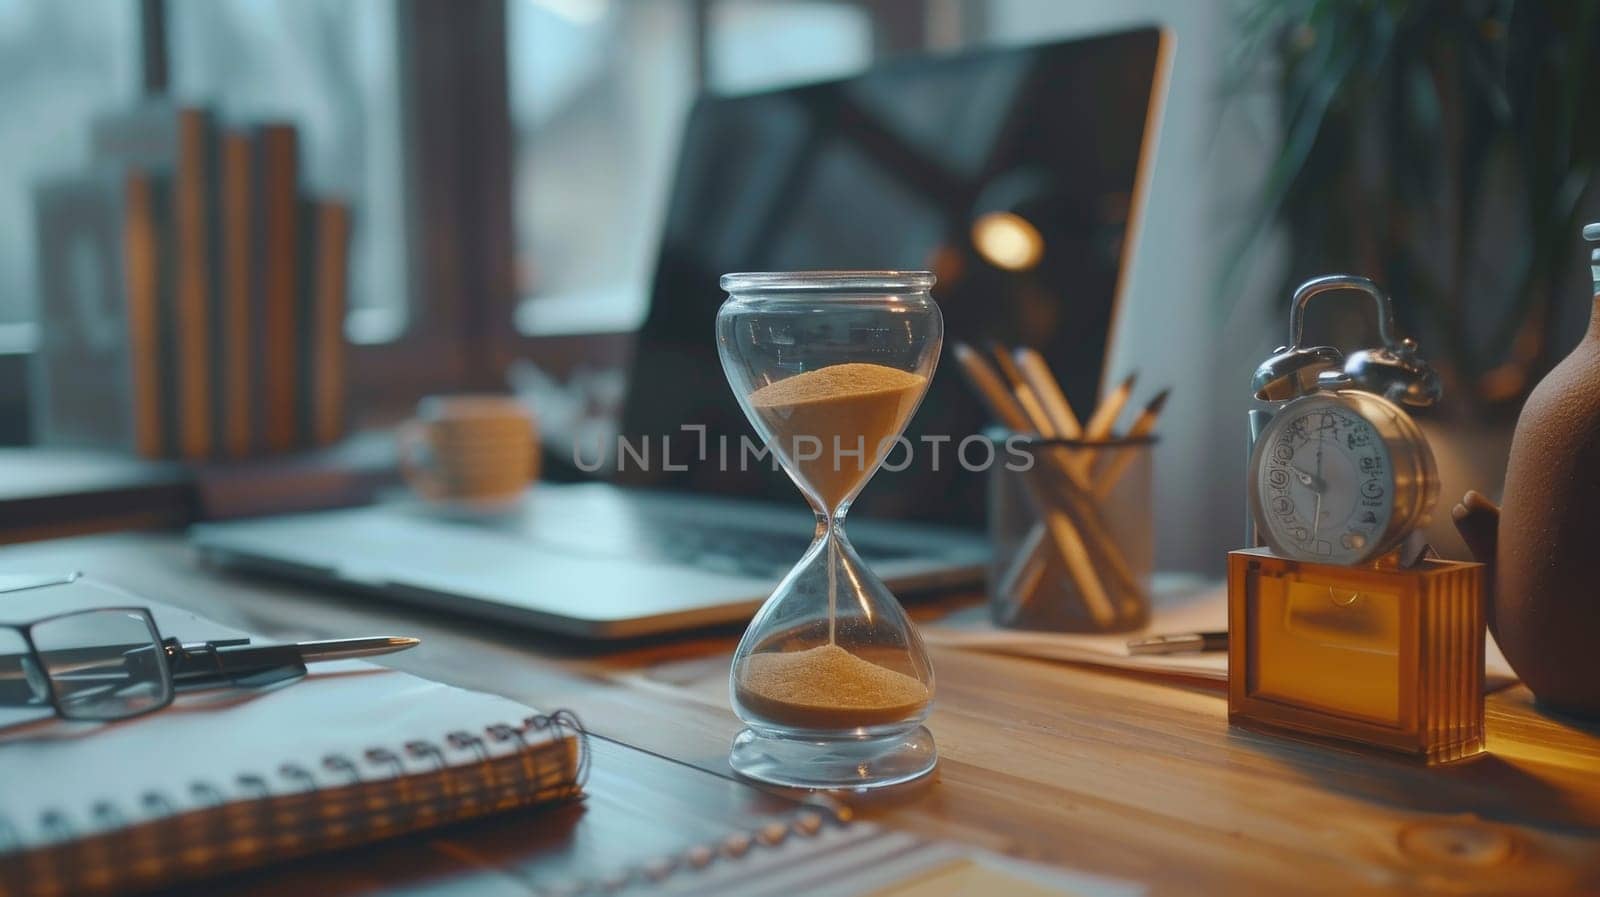 A desk with a laptop, a glass sand timer, and a potted plant. The scene is bright and inviting, with the sunlight streaming in through the window. The sand timer is a reminder to take breaks